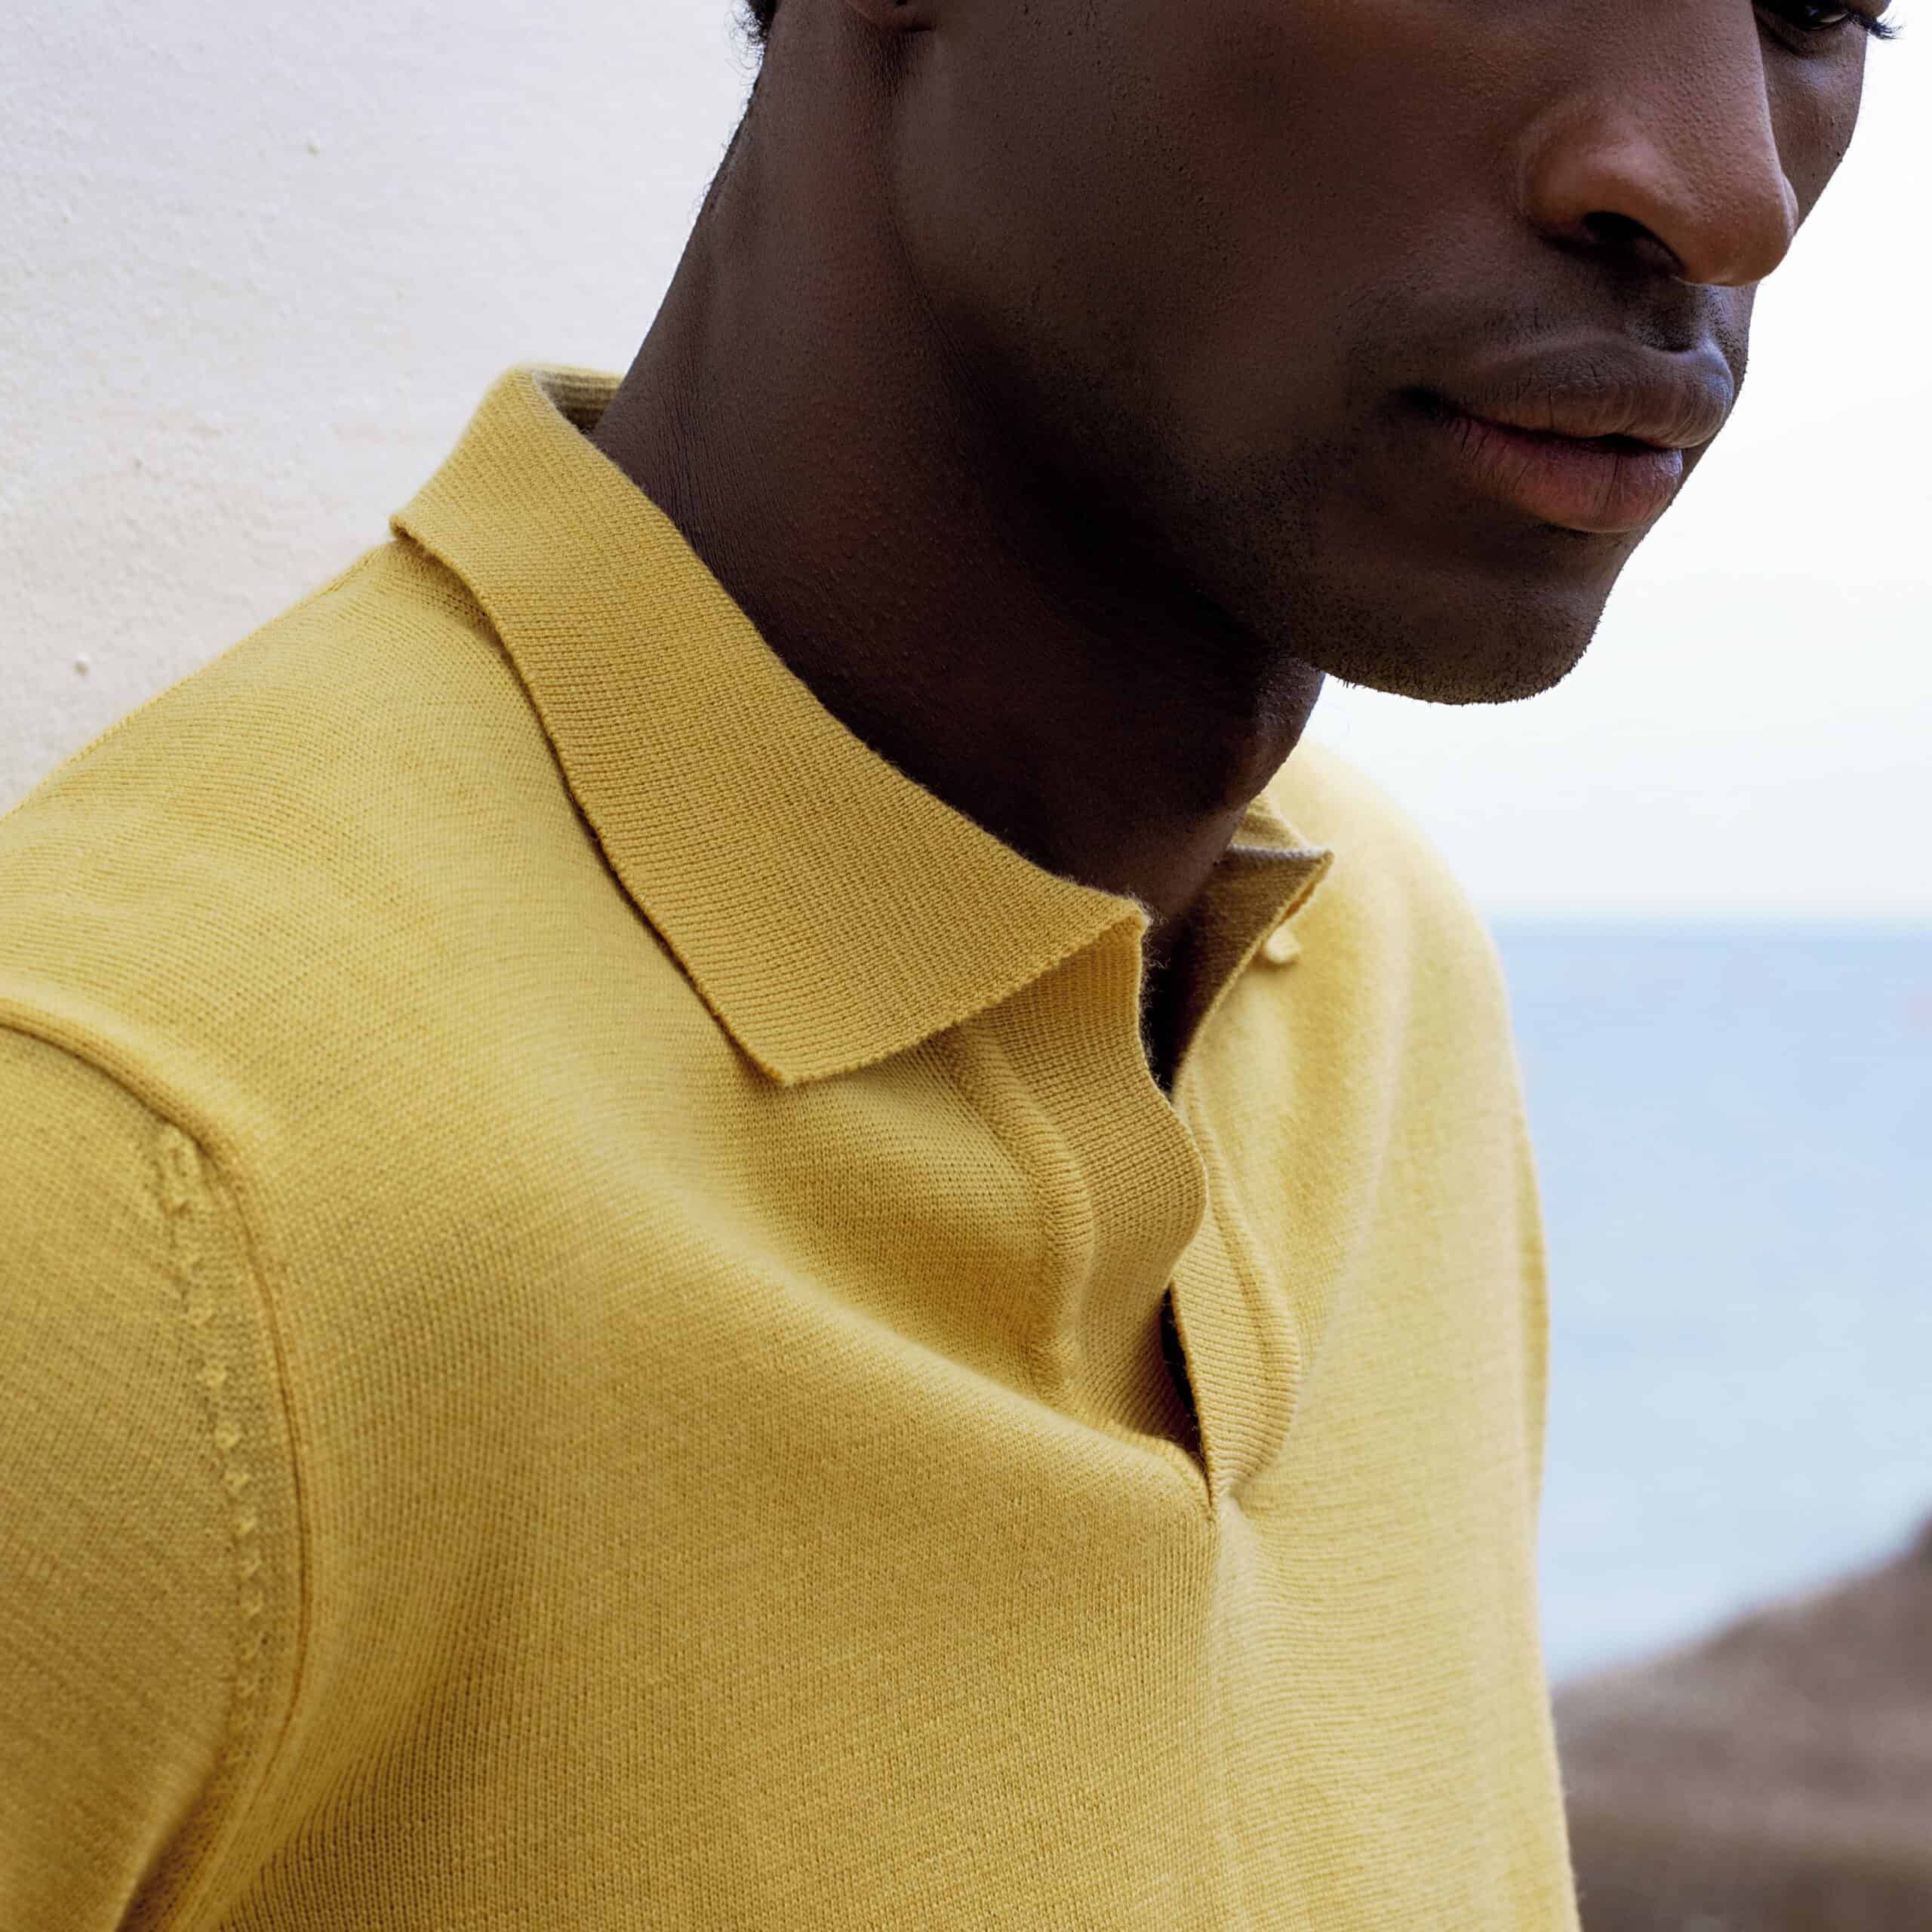 man wearing a knitted polo shirt